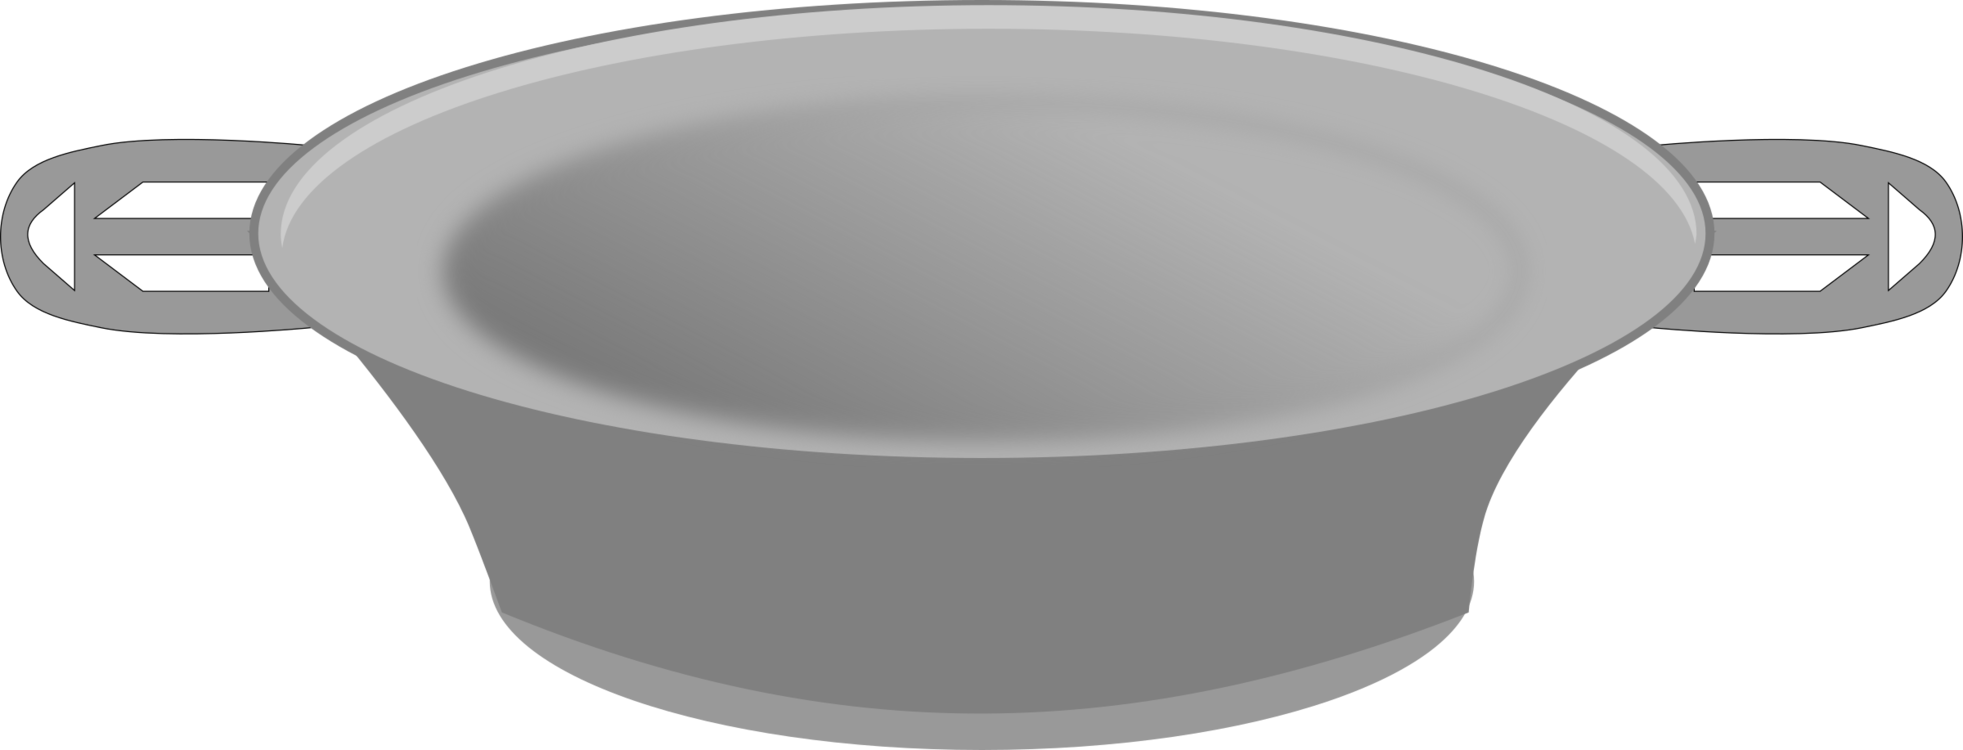 Lid,Cup,Cookware And Bakeware